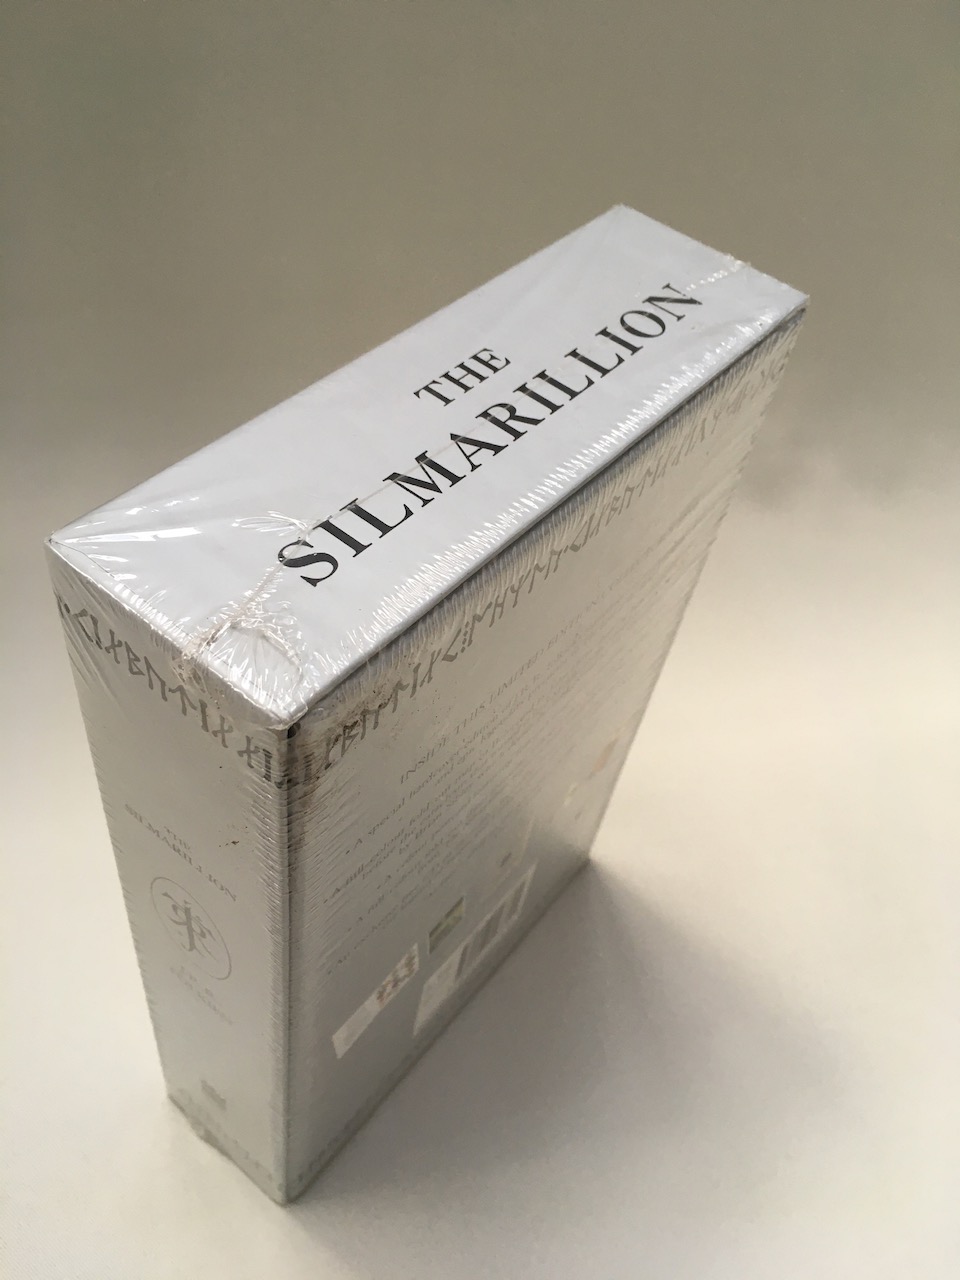 
The Silmarillion Limited Collector's Box 7